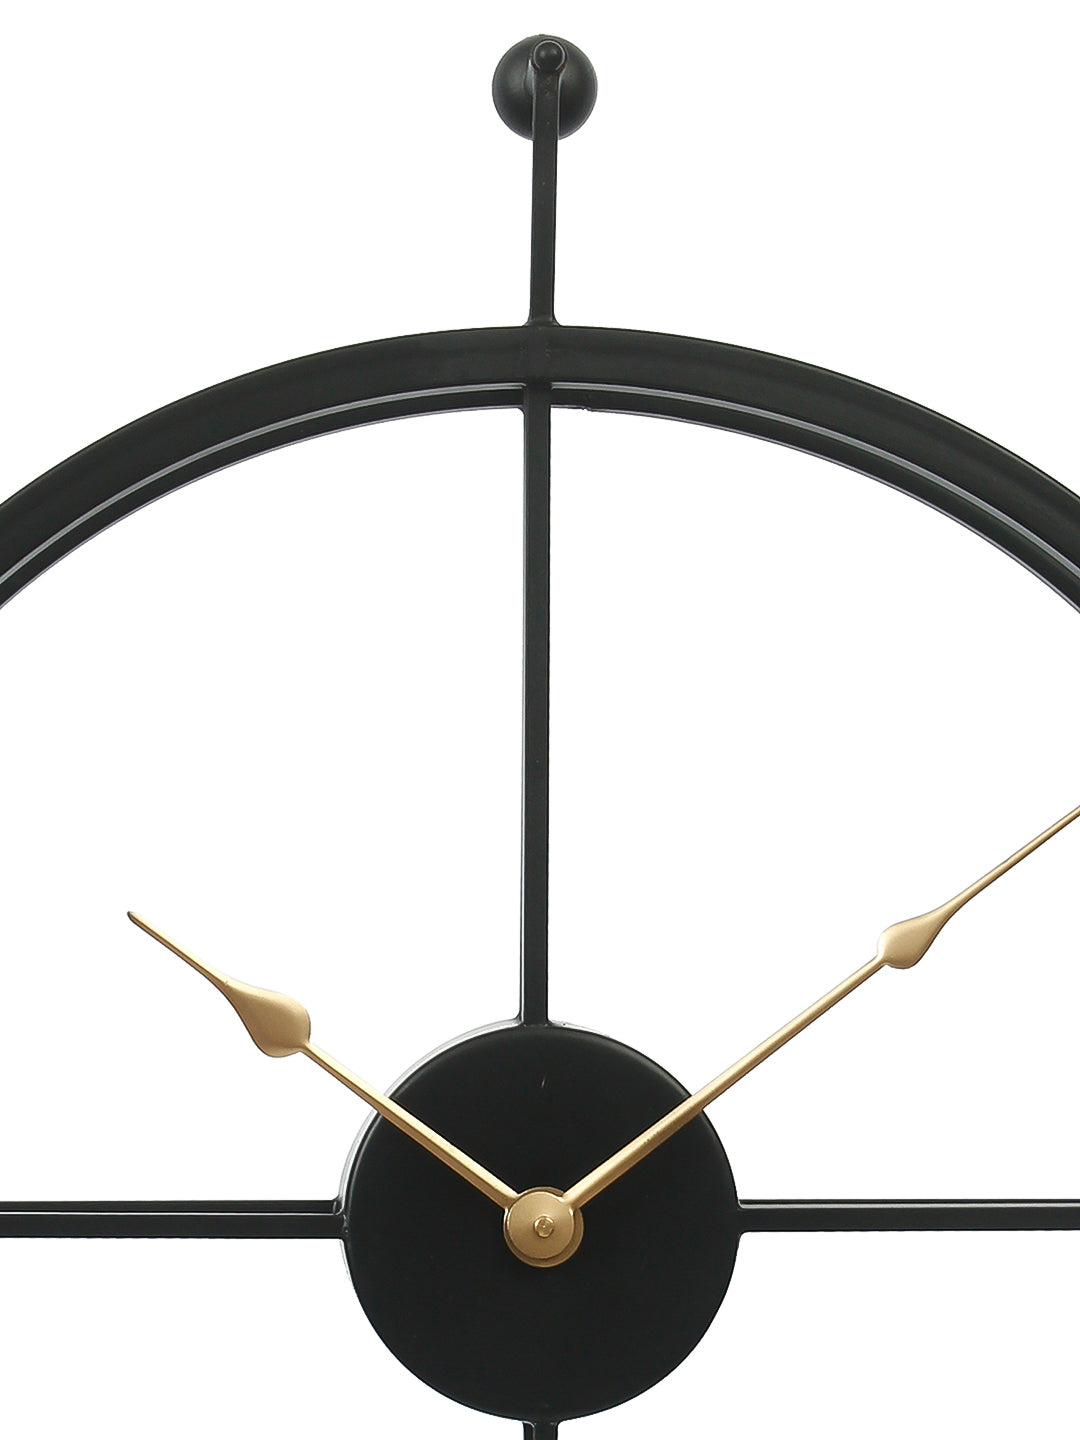 Black Iron Round Handcrafted Modern Wall Clock Without Glass and numbers 4